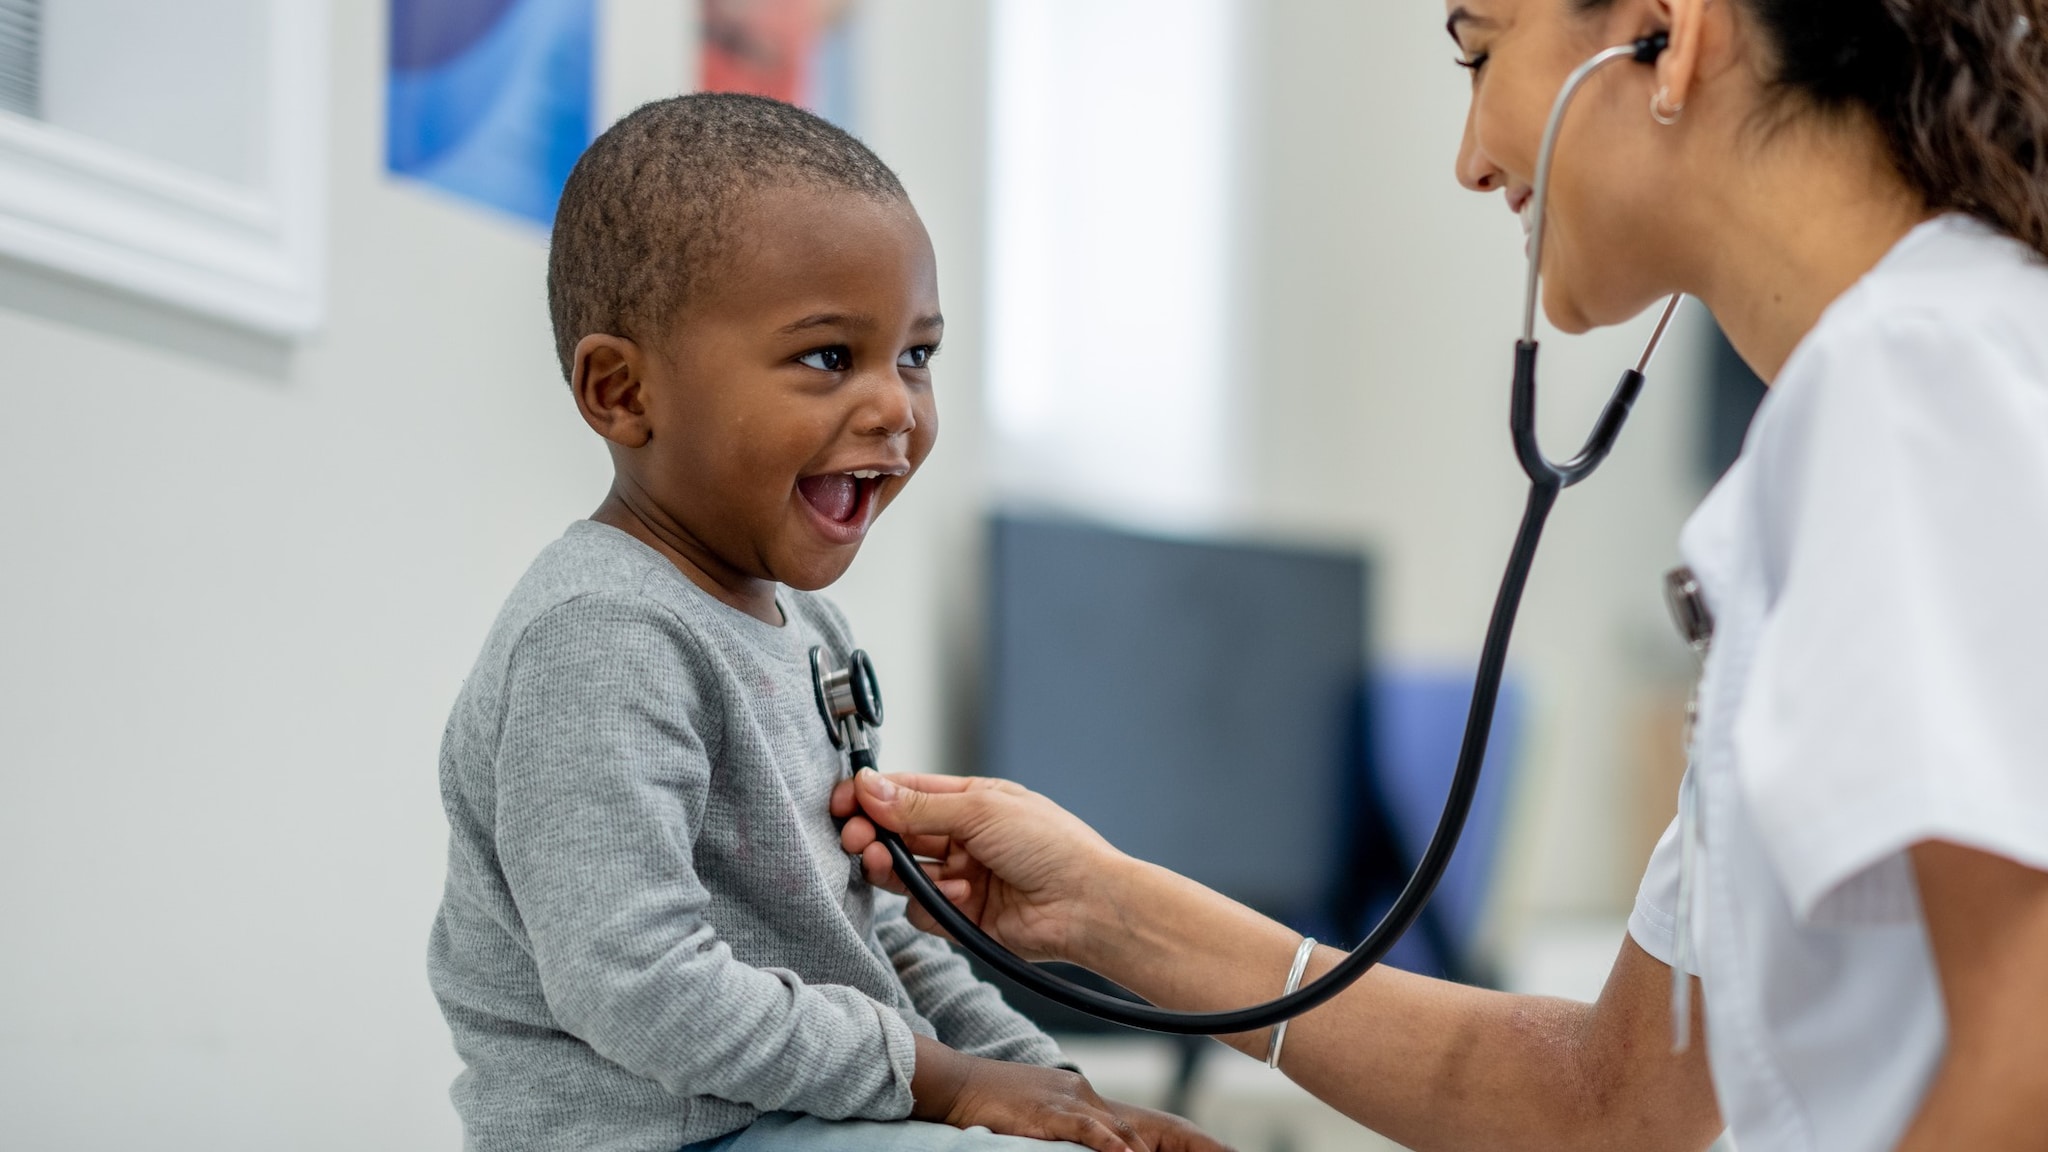 A doctor inspecting a young child with a stethoscope.